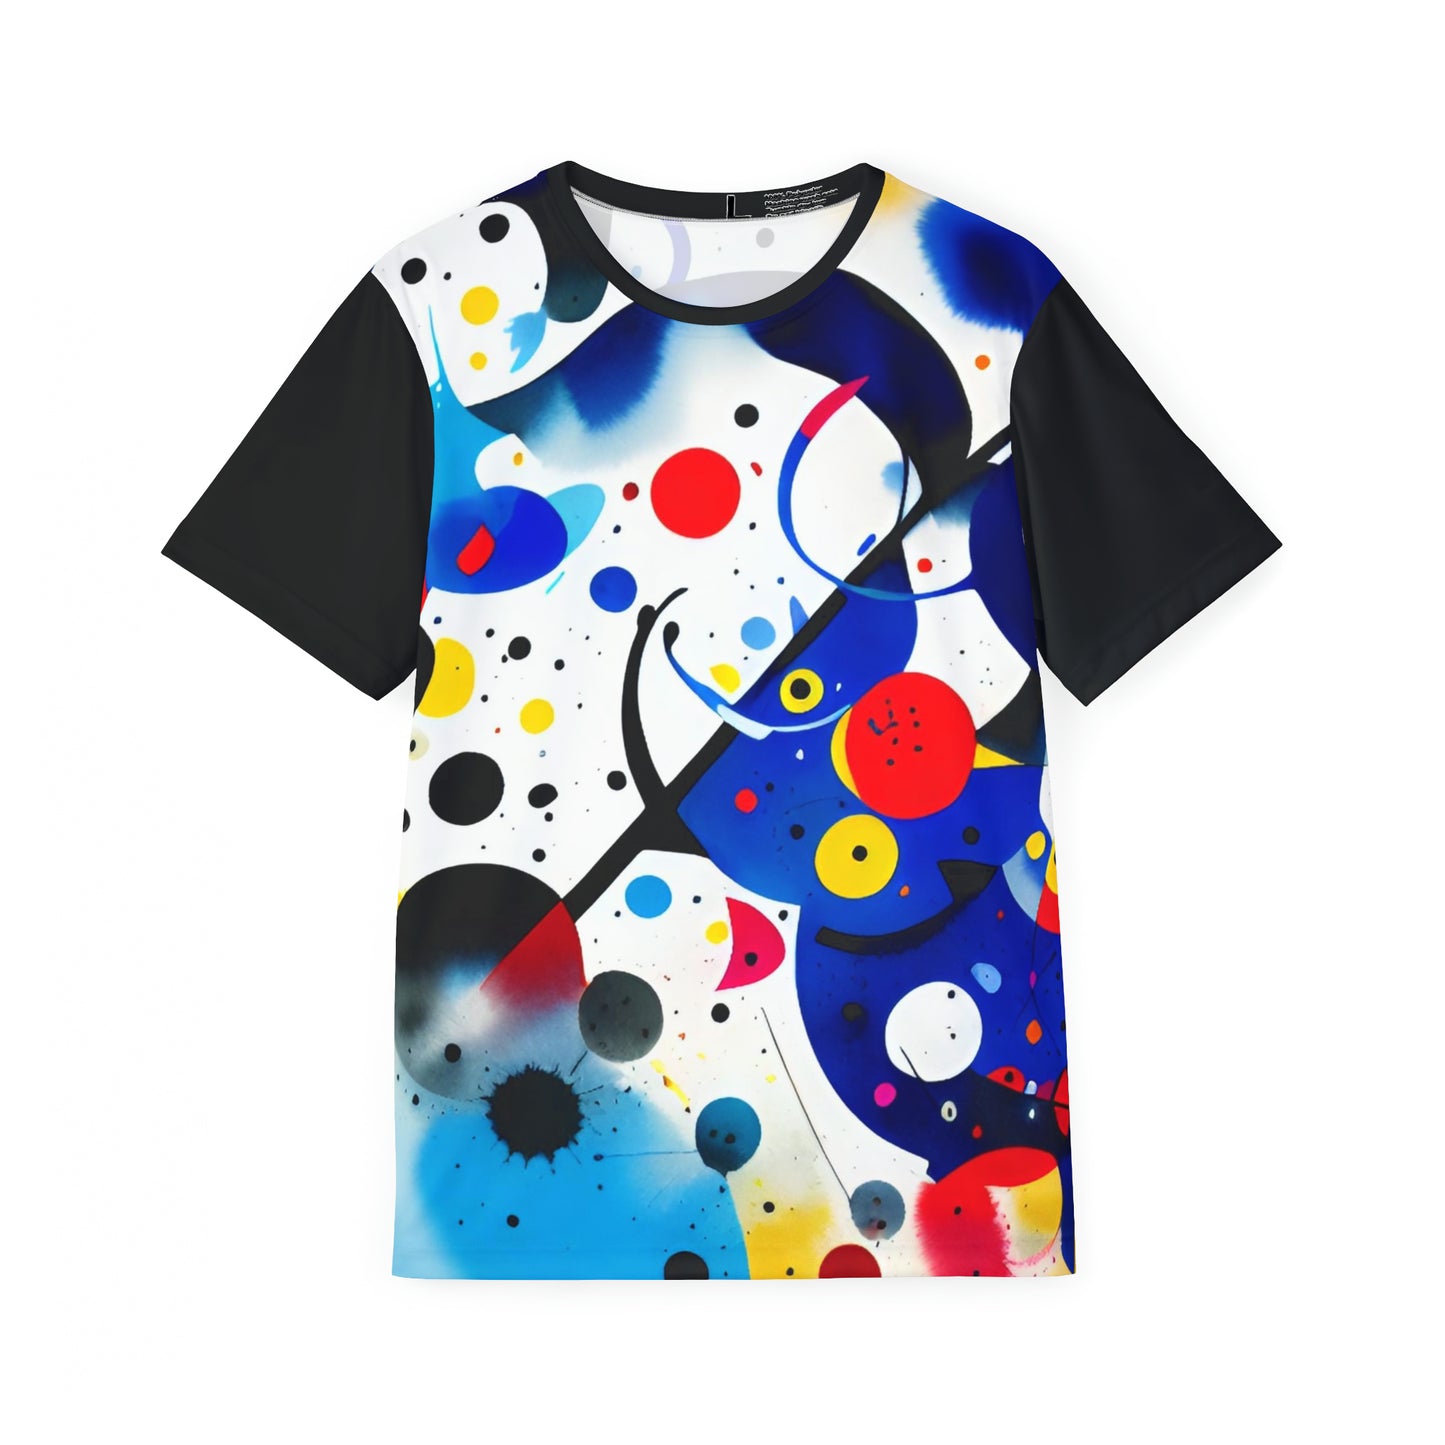 Men's Sports Jersey, Inspired by Miro